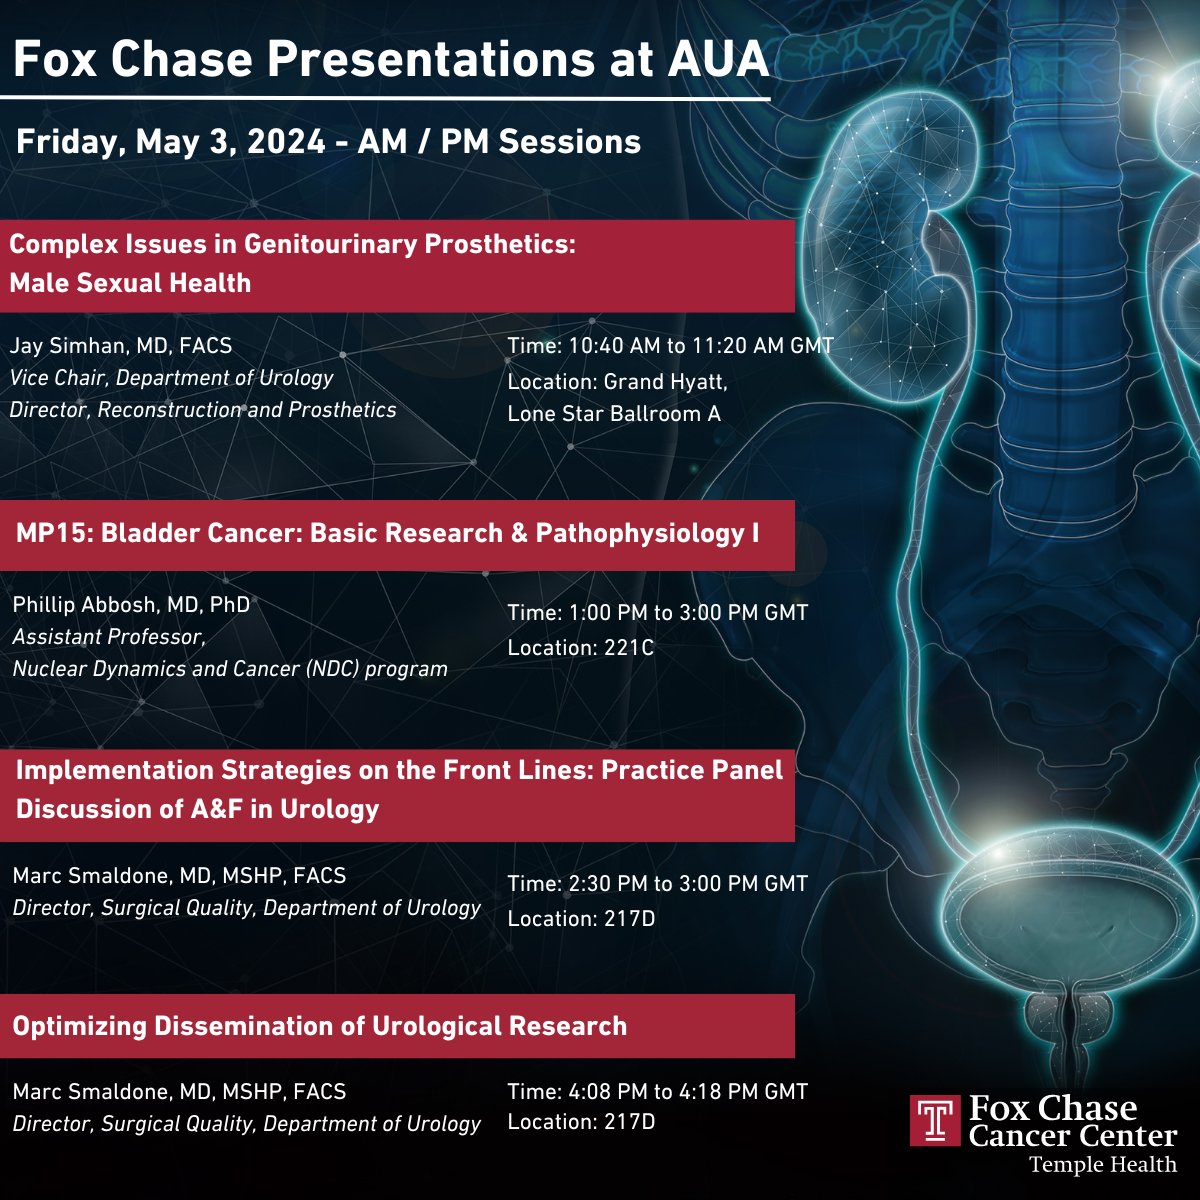 Fox Chase presentations at #AUA24 happening later this morning and afternoon! Hear from Jay Simhan, MD, FACS, (@JSimhan), Phillip Abbosh, MD, PhD, (@scientistatlrge) and Marc Smaldone, MSHP, FACS. ⬇️